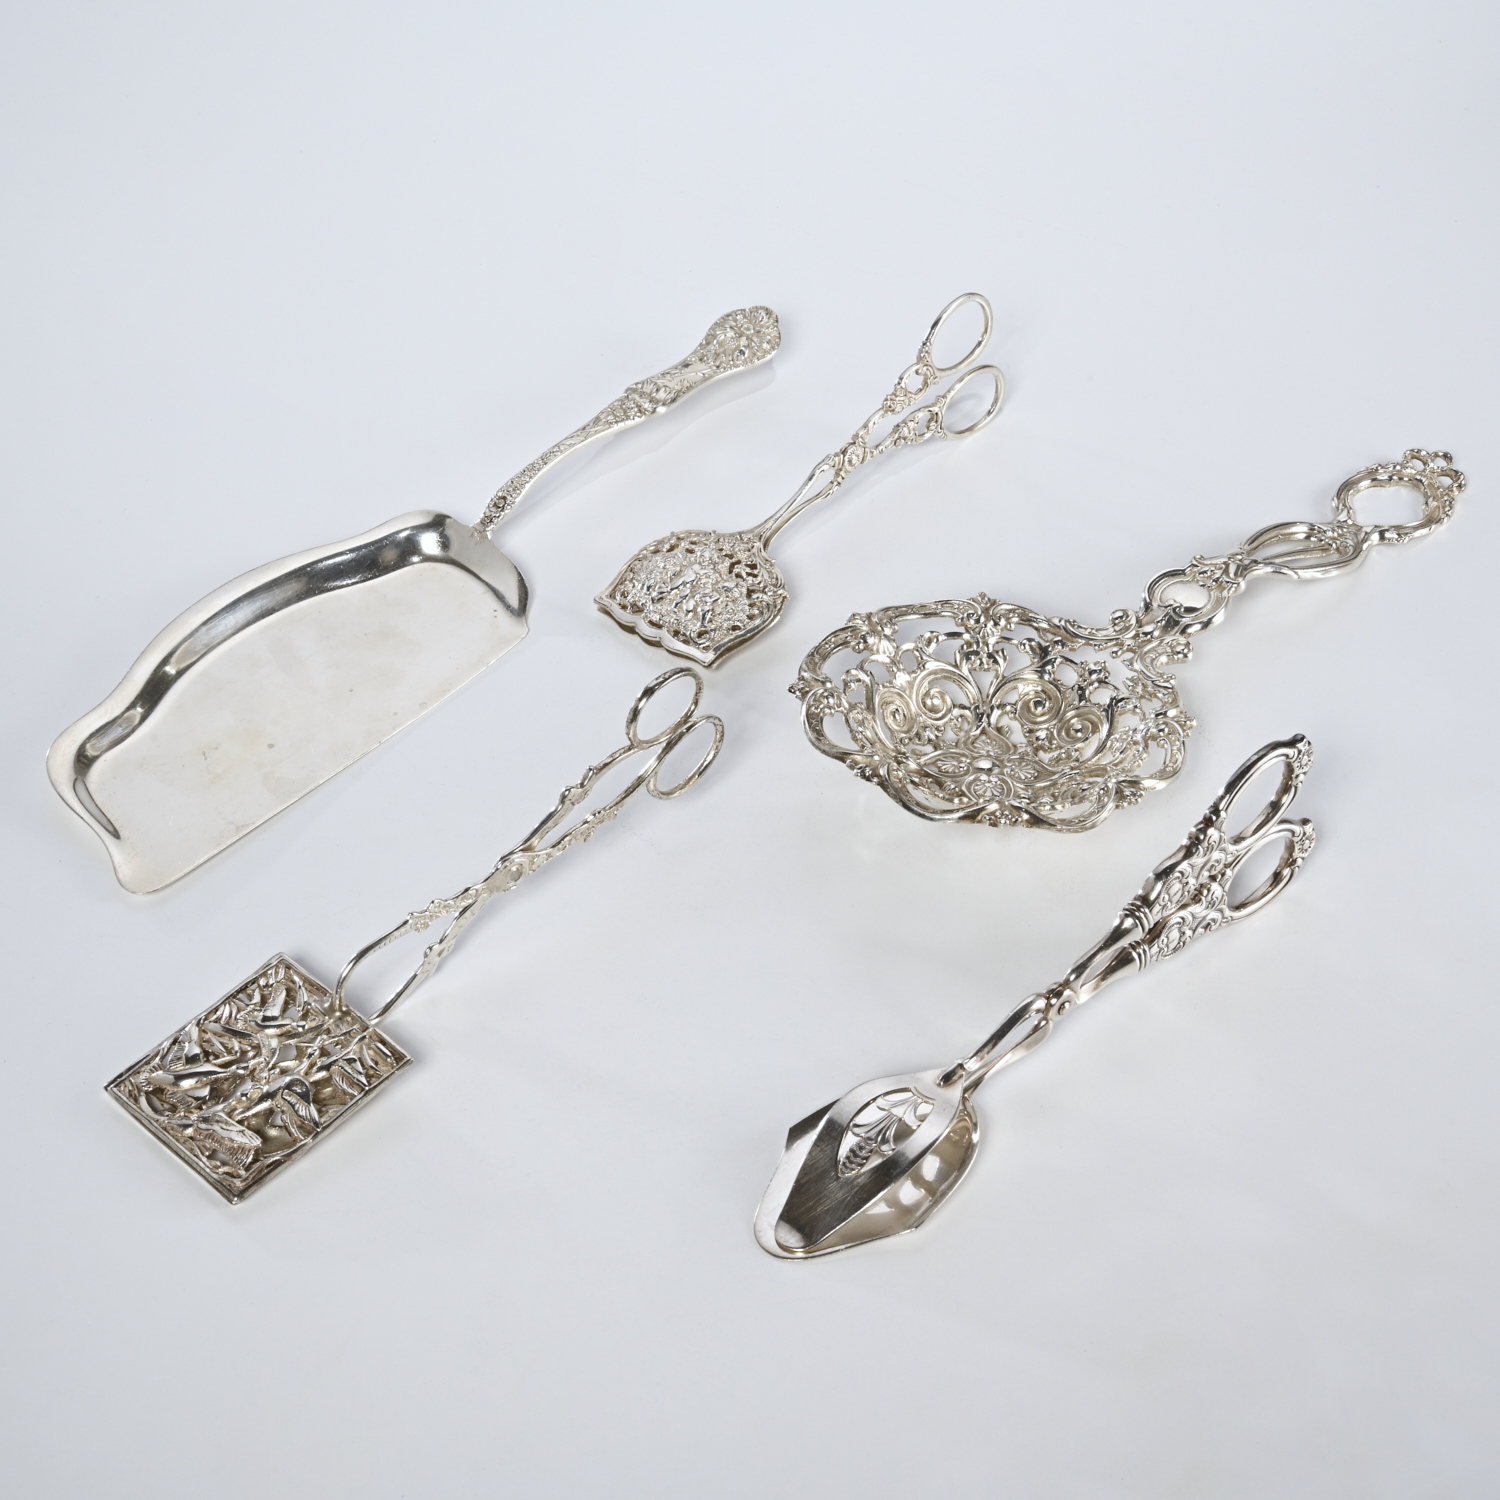 (5) ORNATE CONTINENTAL SILVER SERVING